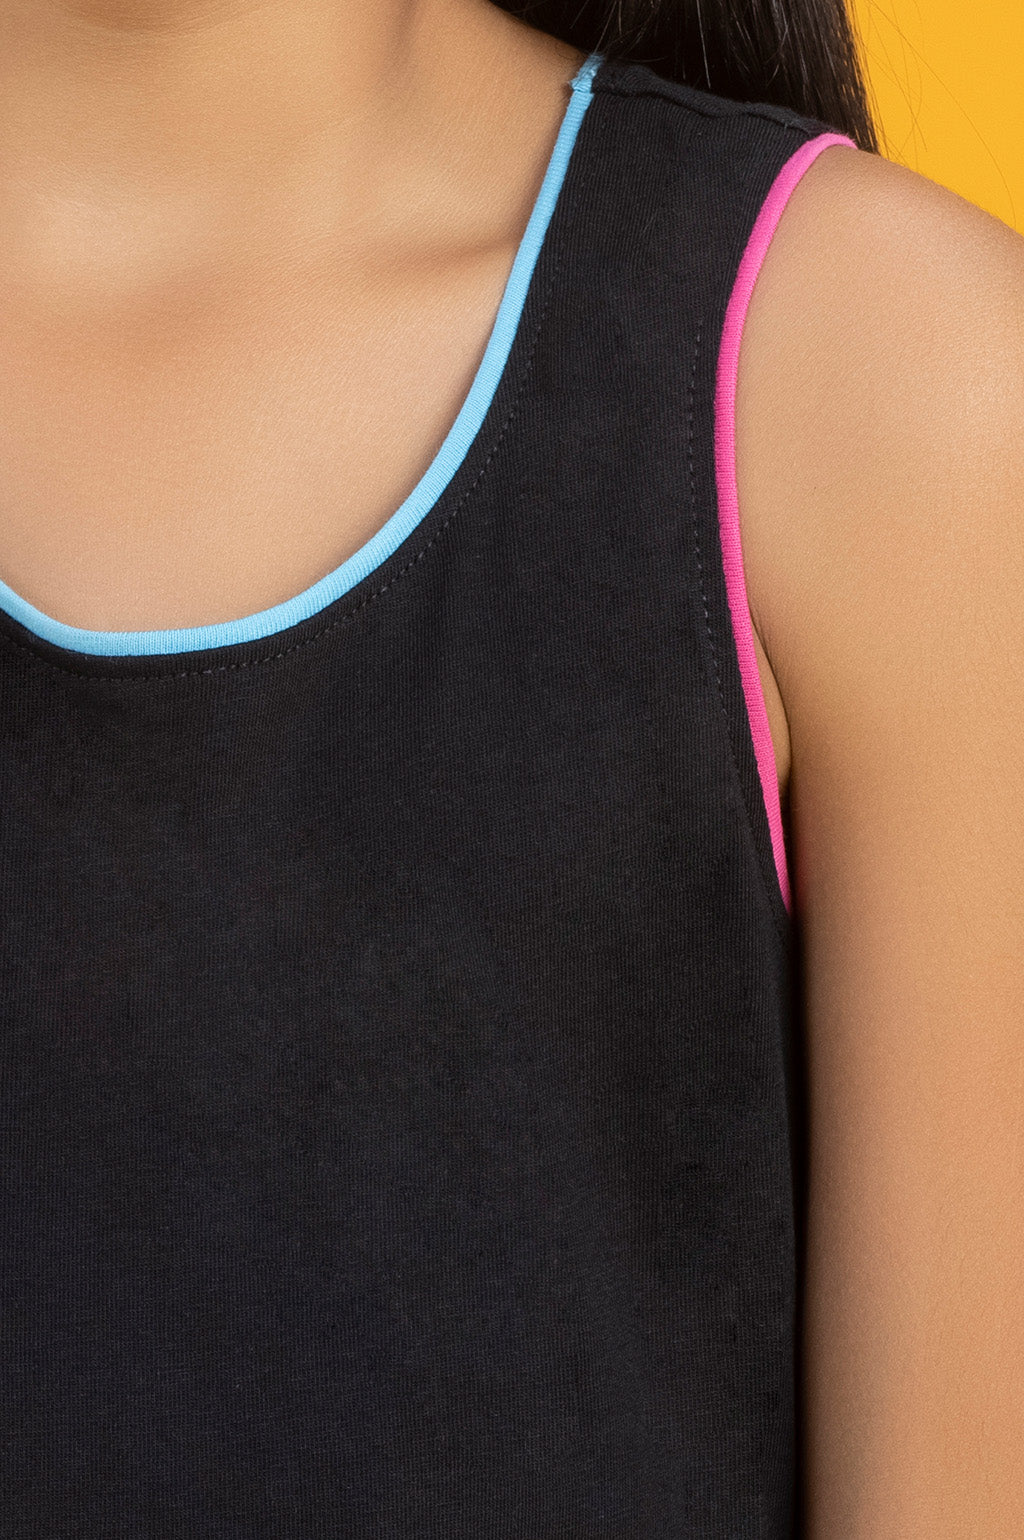 Girls tank top primary combed cotton black - XYLife Kids Wear